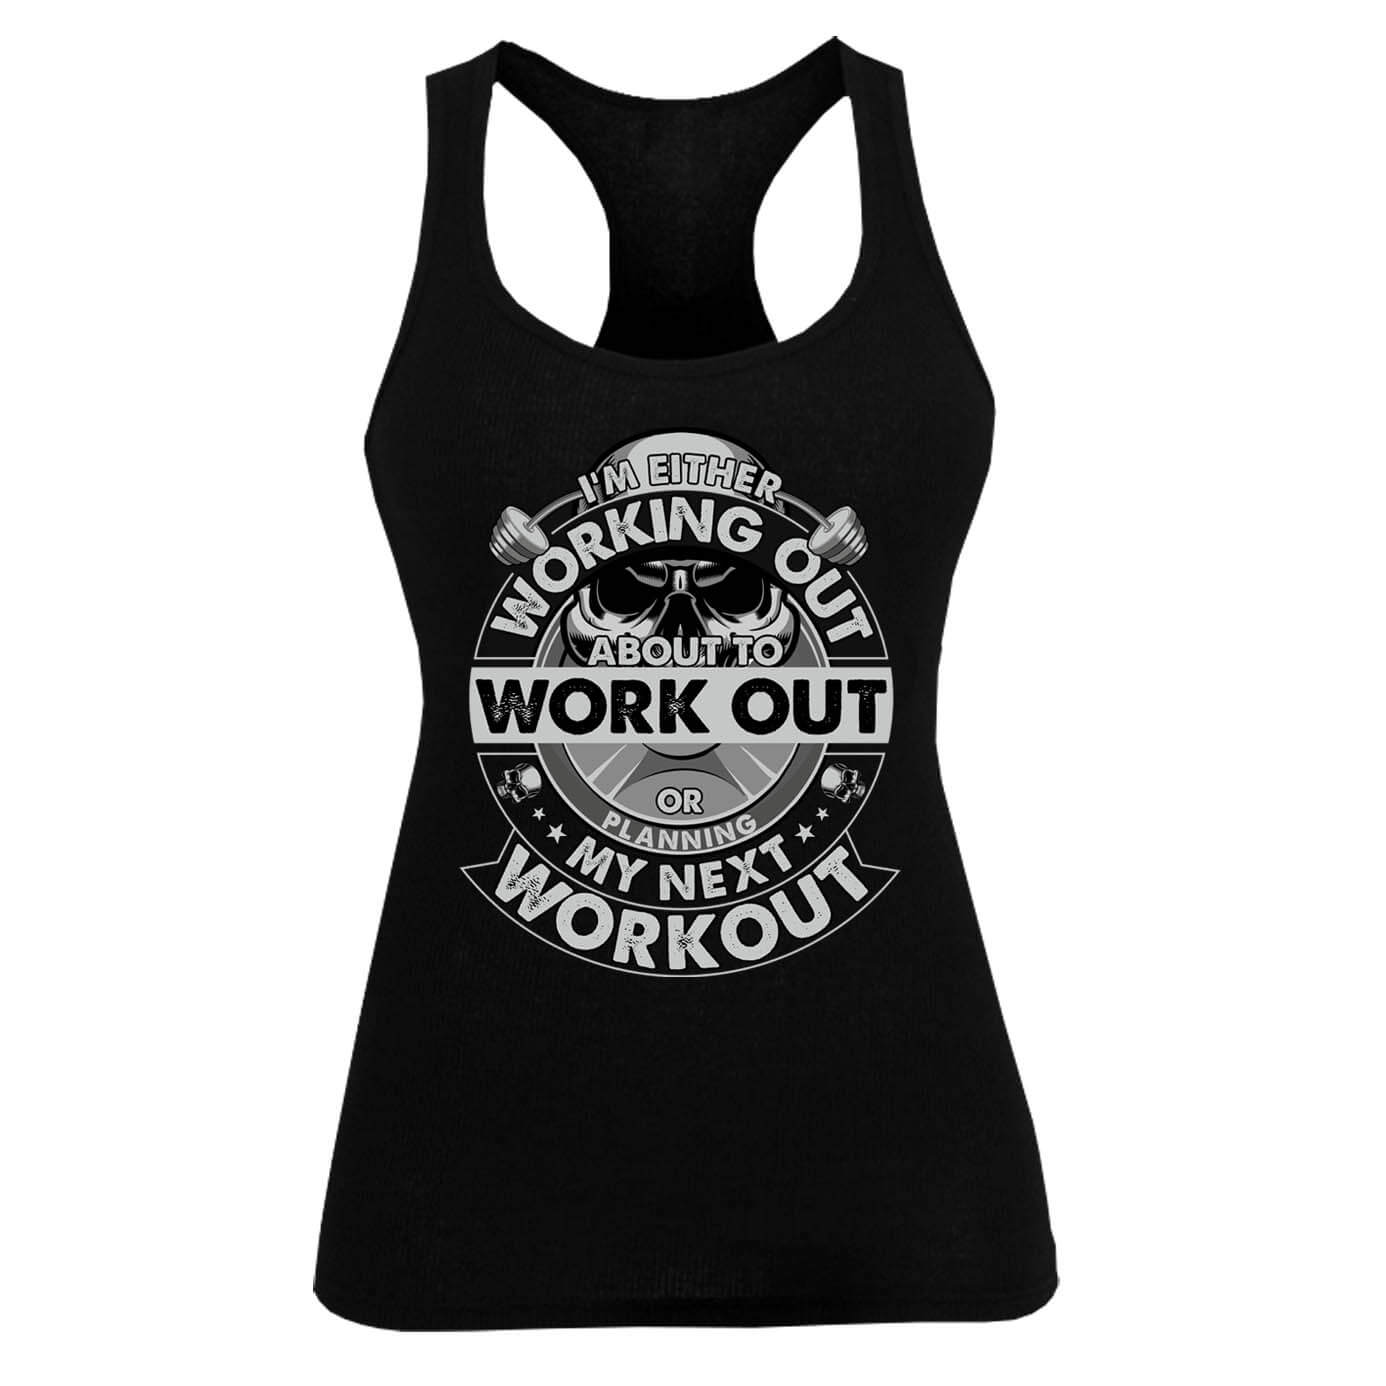 I'm Either Working Out Women's Racerback Tank Top